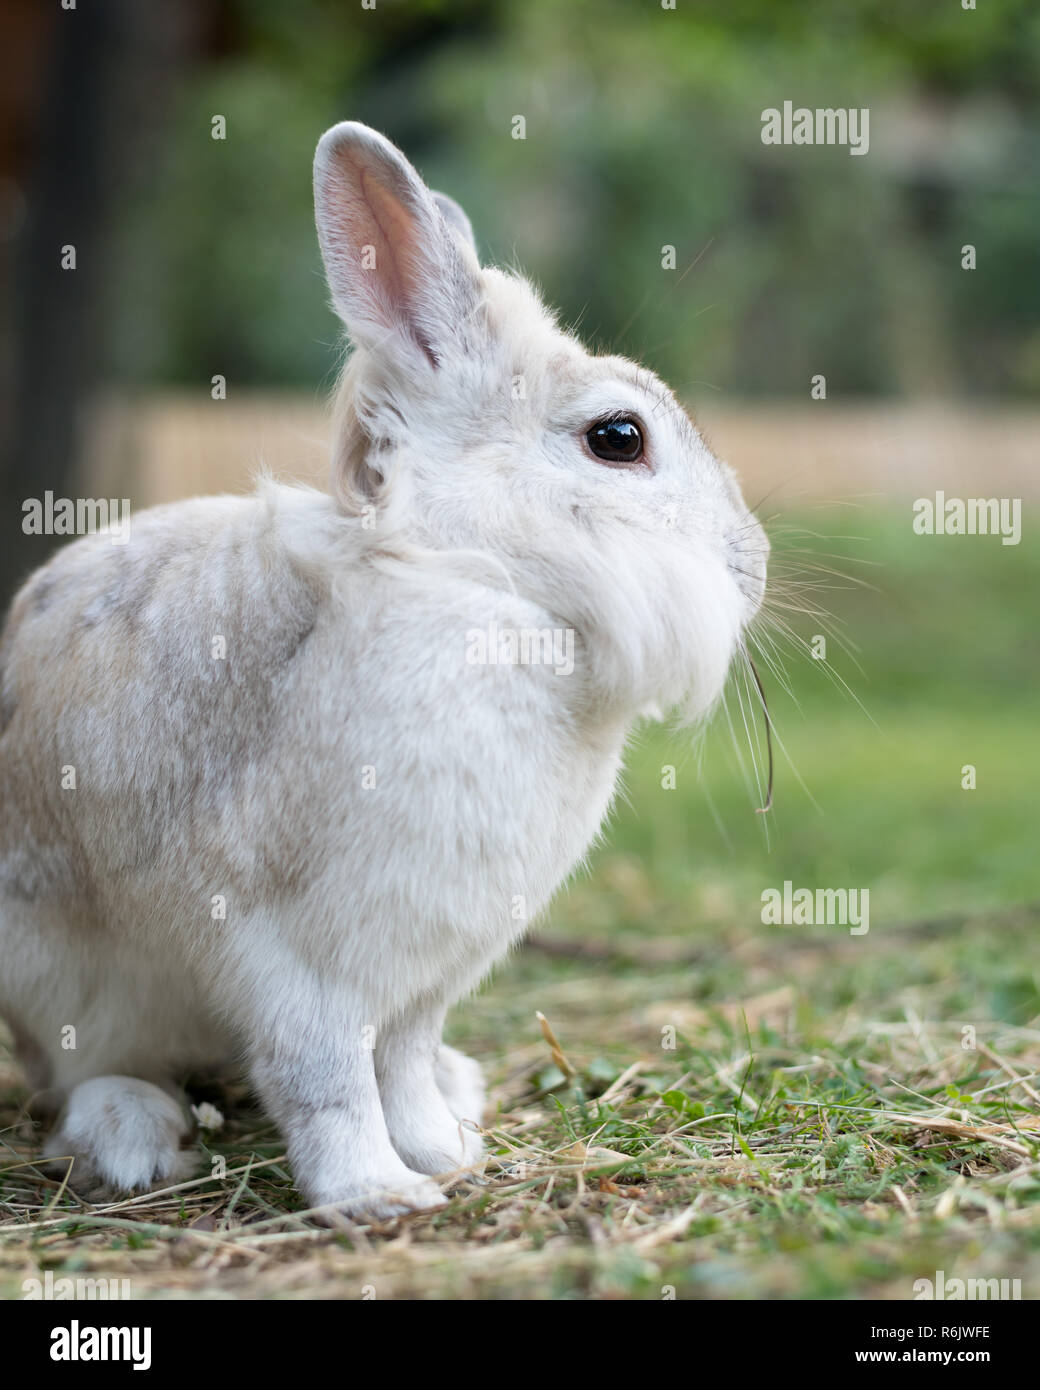 A white dwarf rabbit (lions head) sitting in the grass, eating Stock Photo